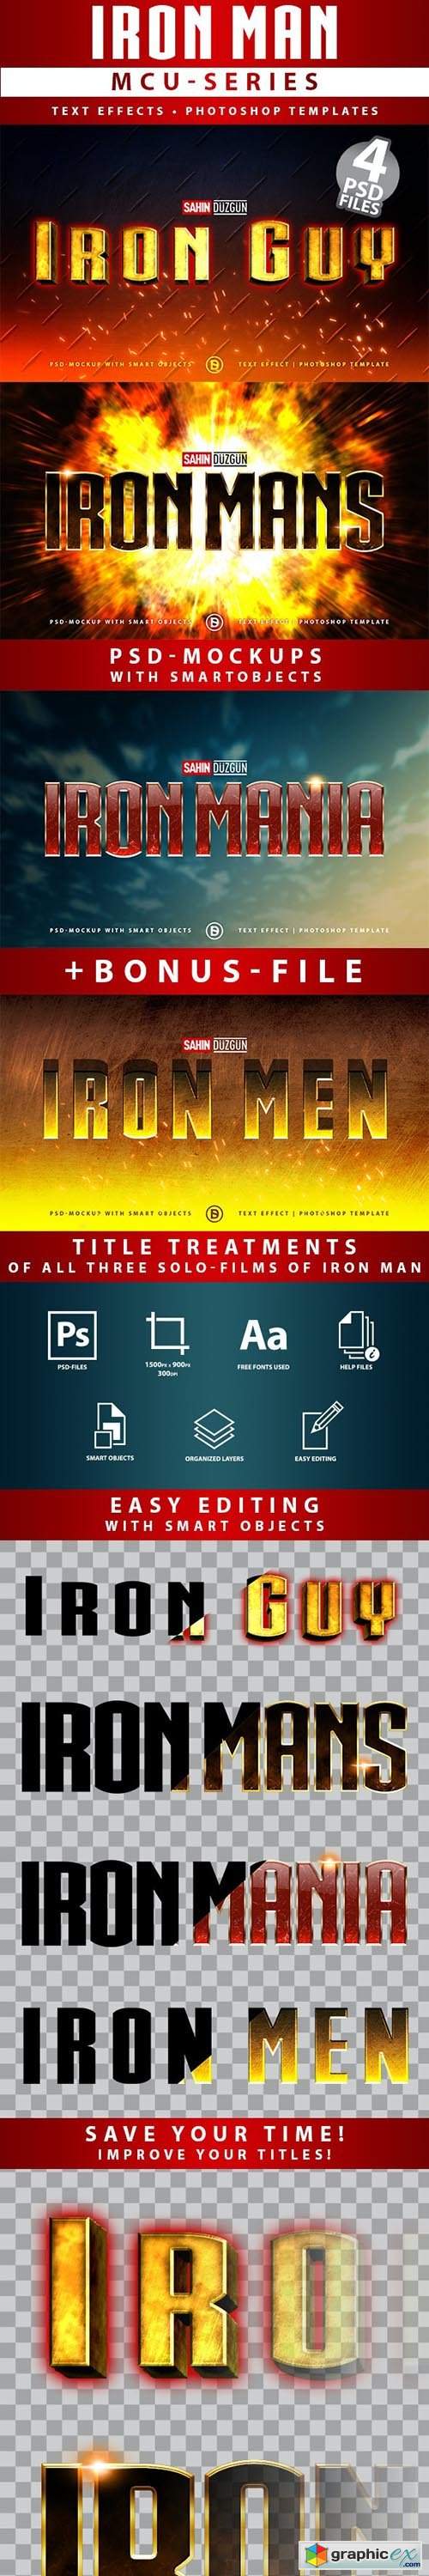  IRON MAN - MCU-Film Series | Text-Effects/Mockups | Template-Package 